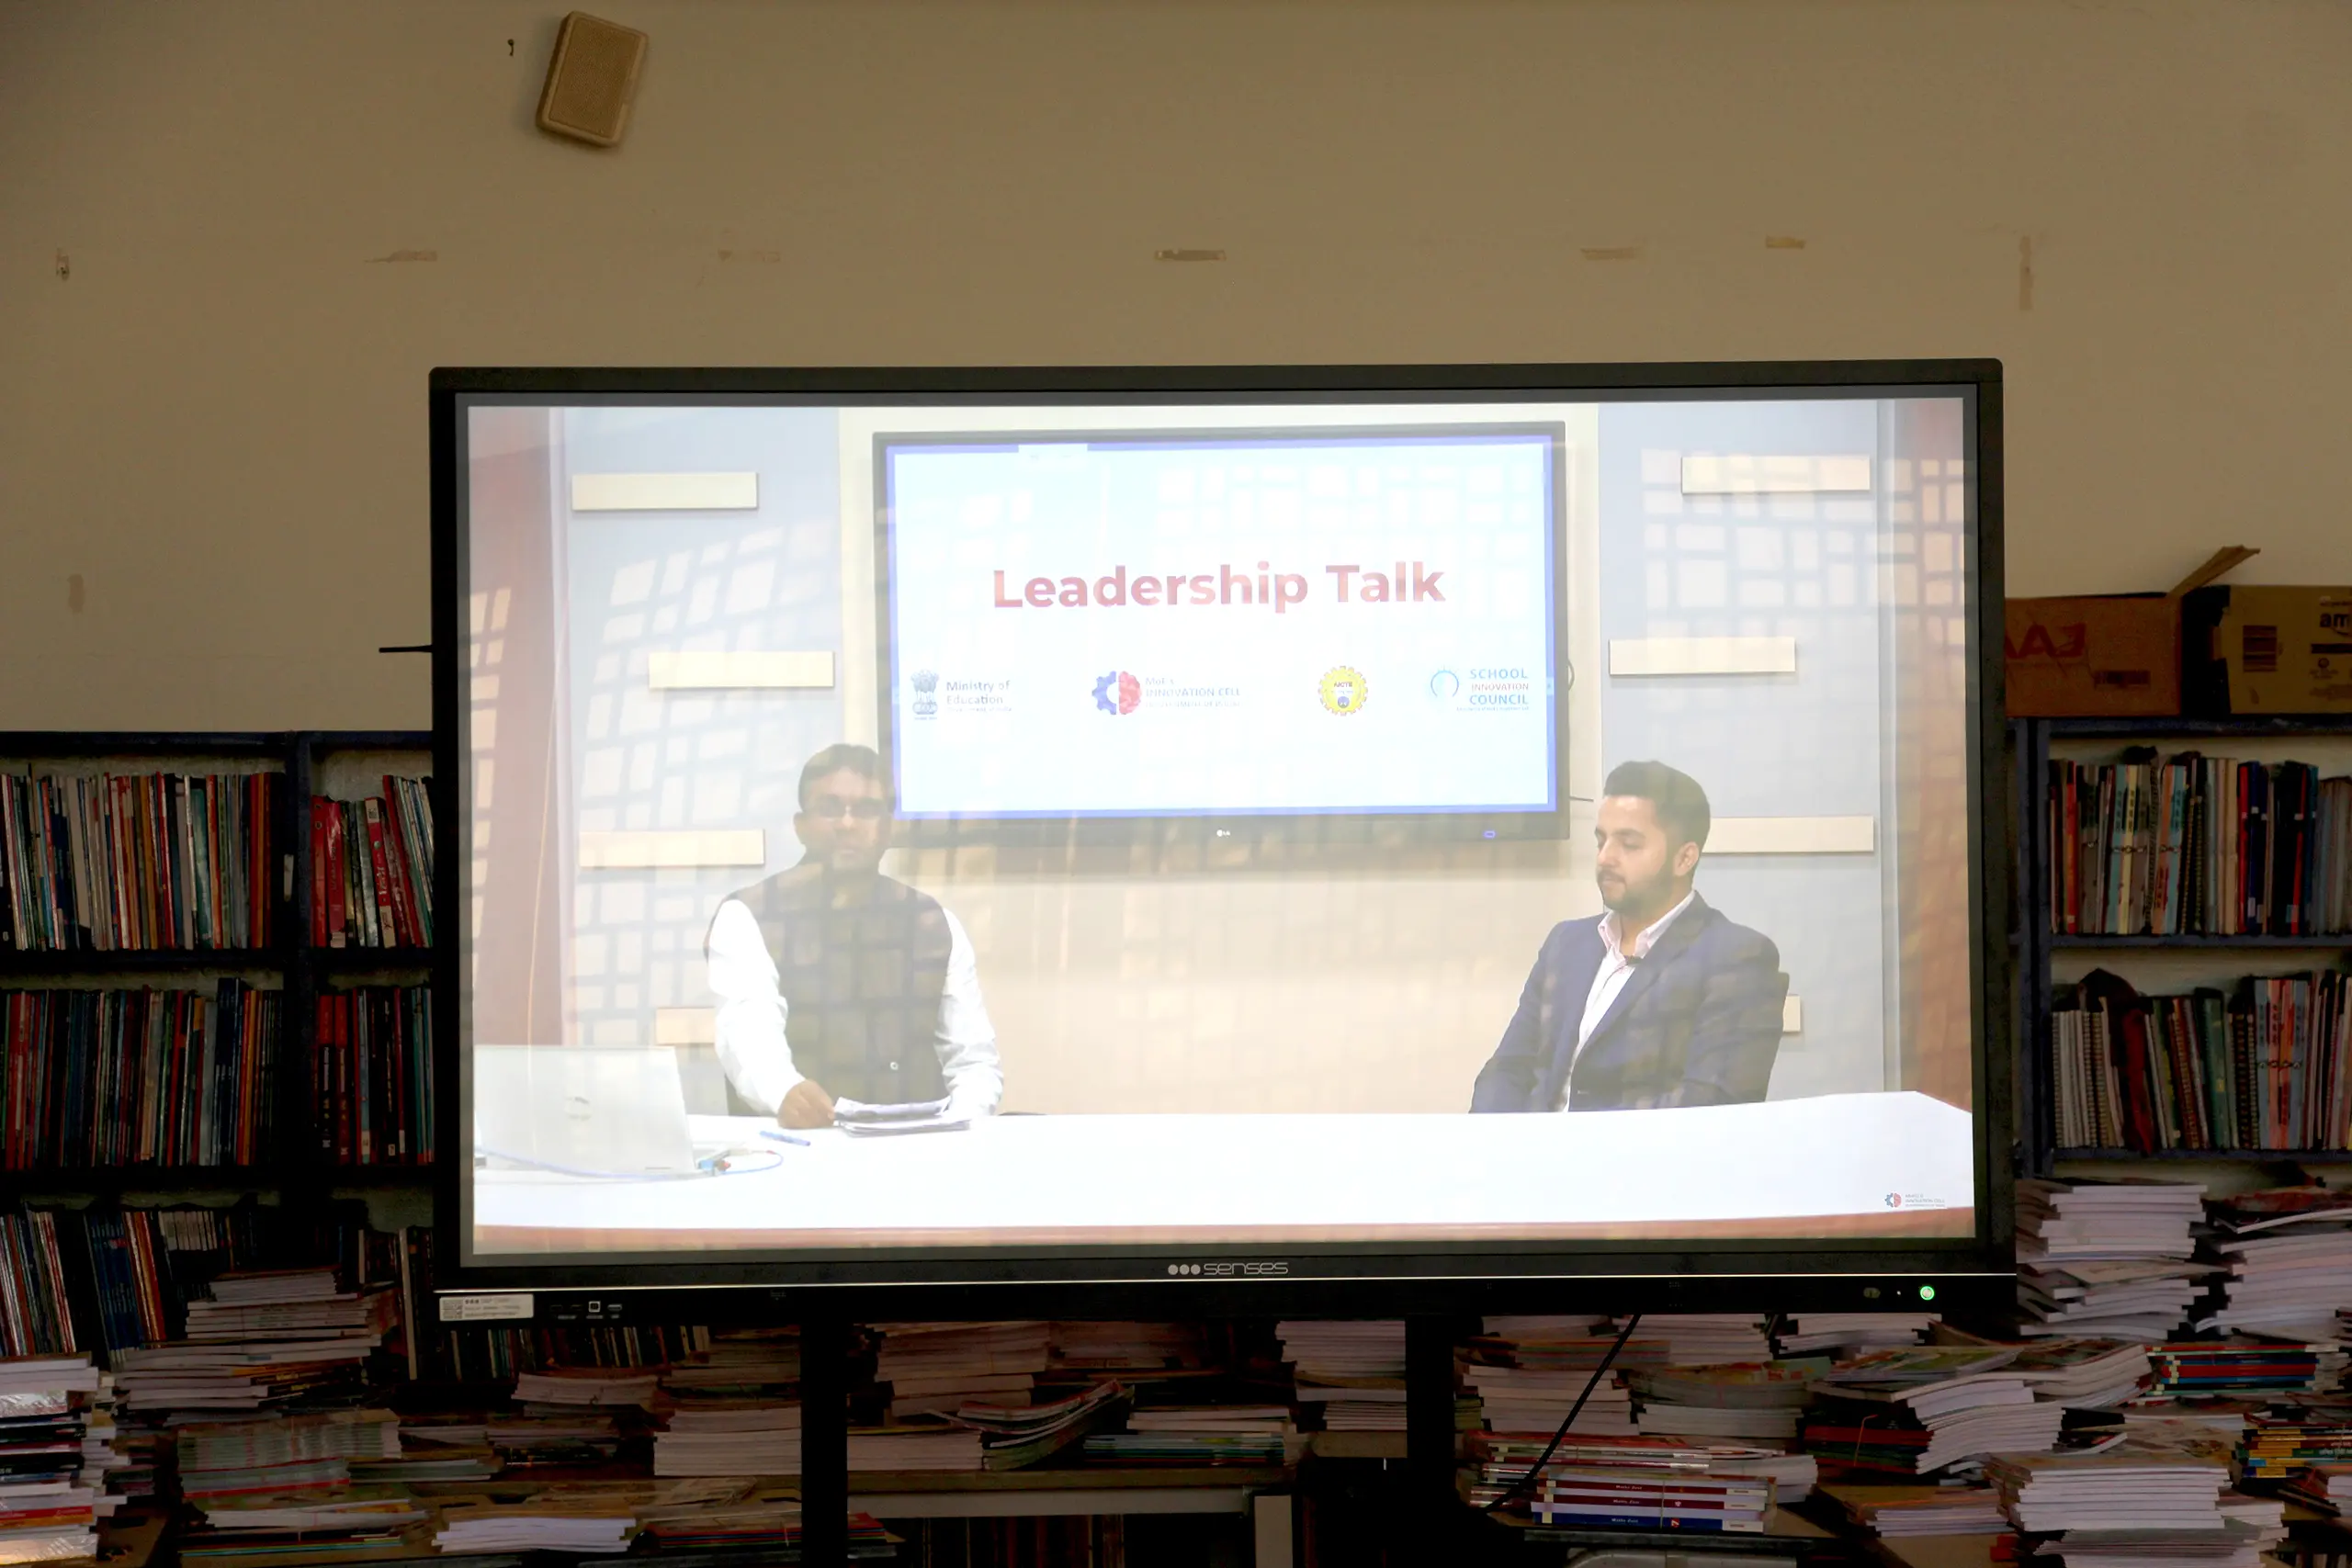 Virtual leadership talk session organized at DPS Warangal where students got a chance to learn leadership skills from renowned leaders.